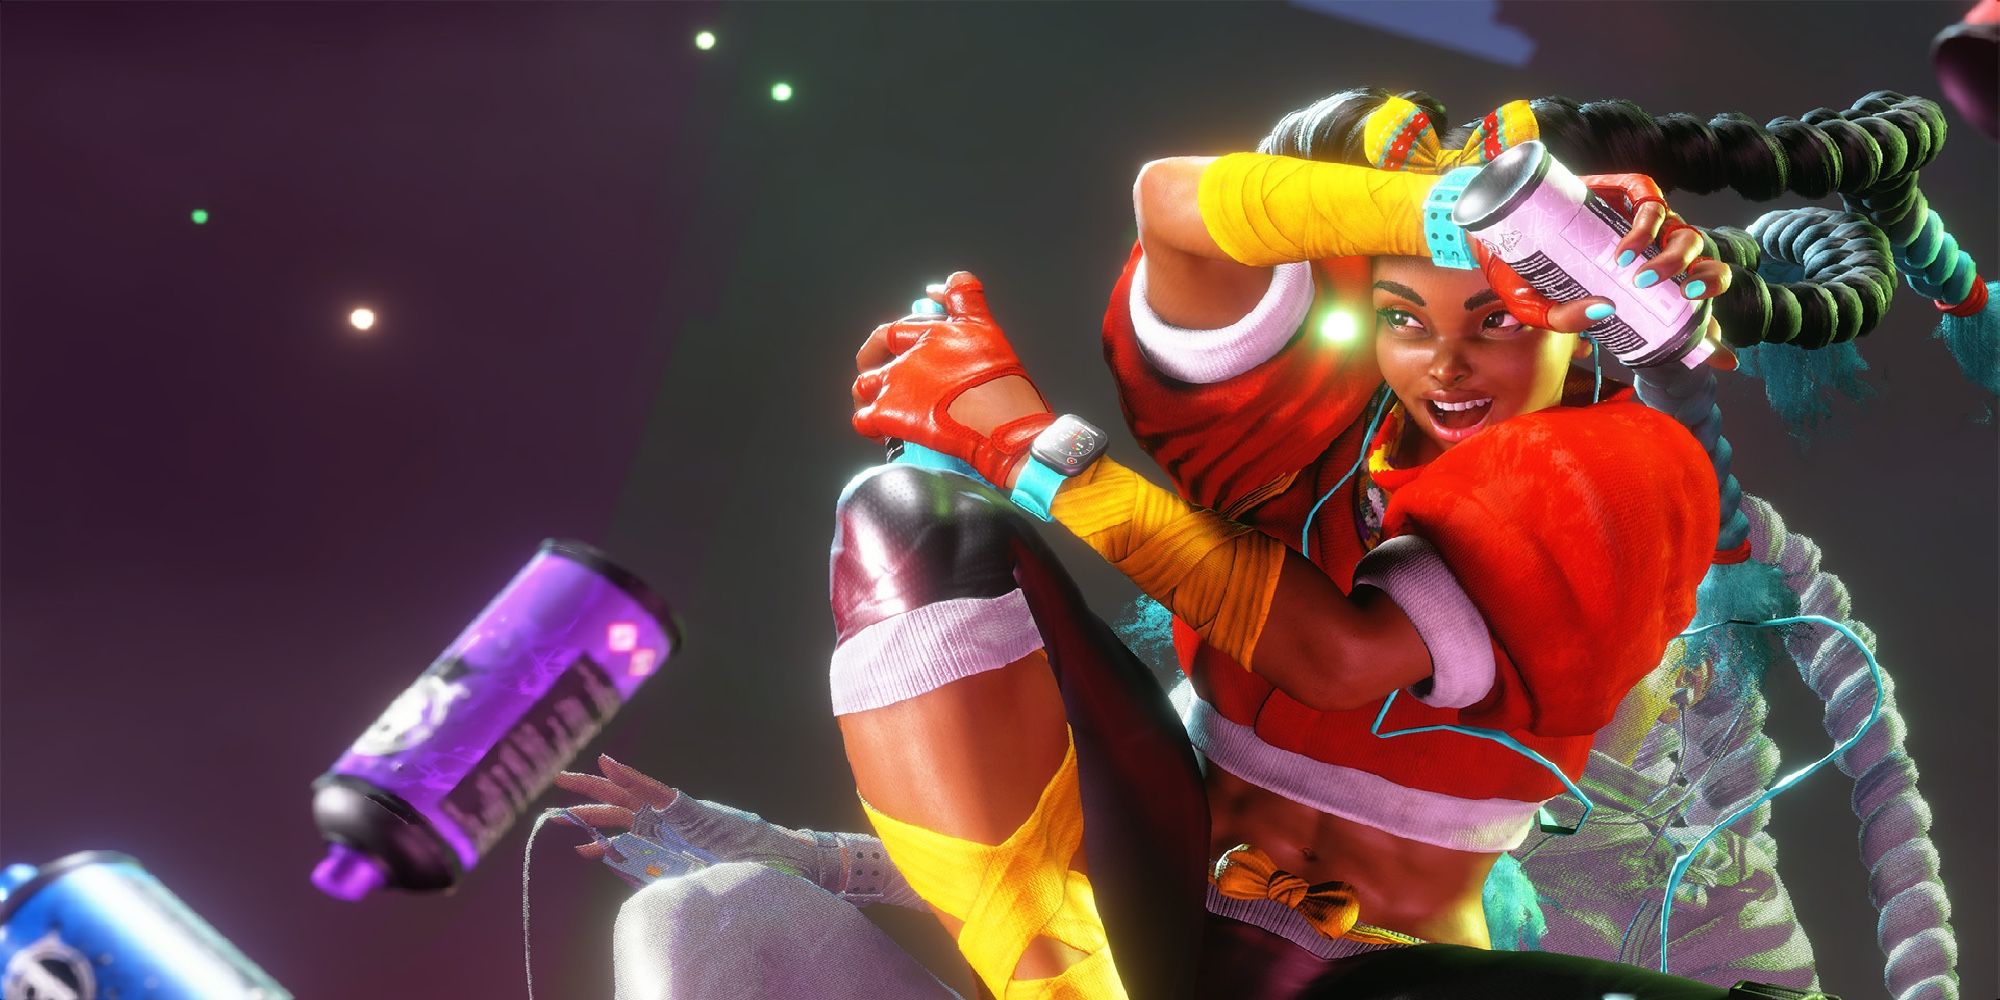 Kimberly, new character in Street Fighter 6, armed with spray cans.